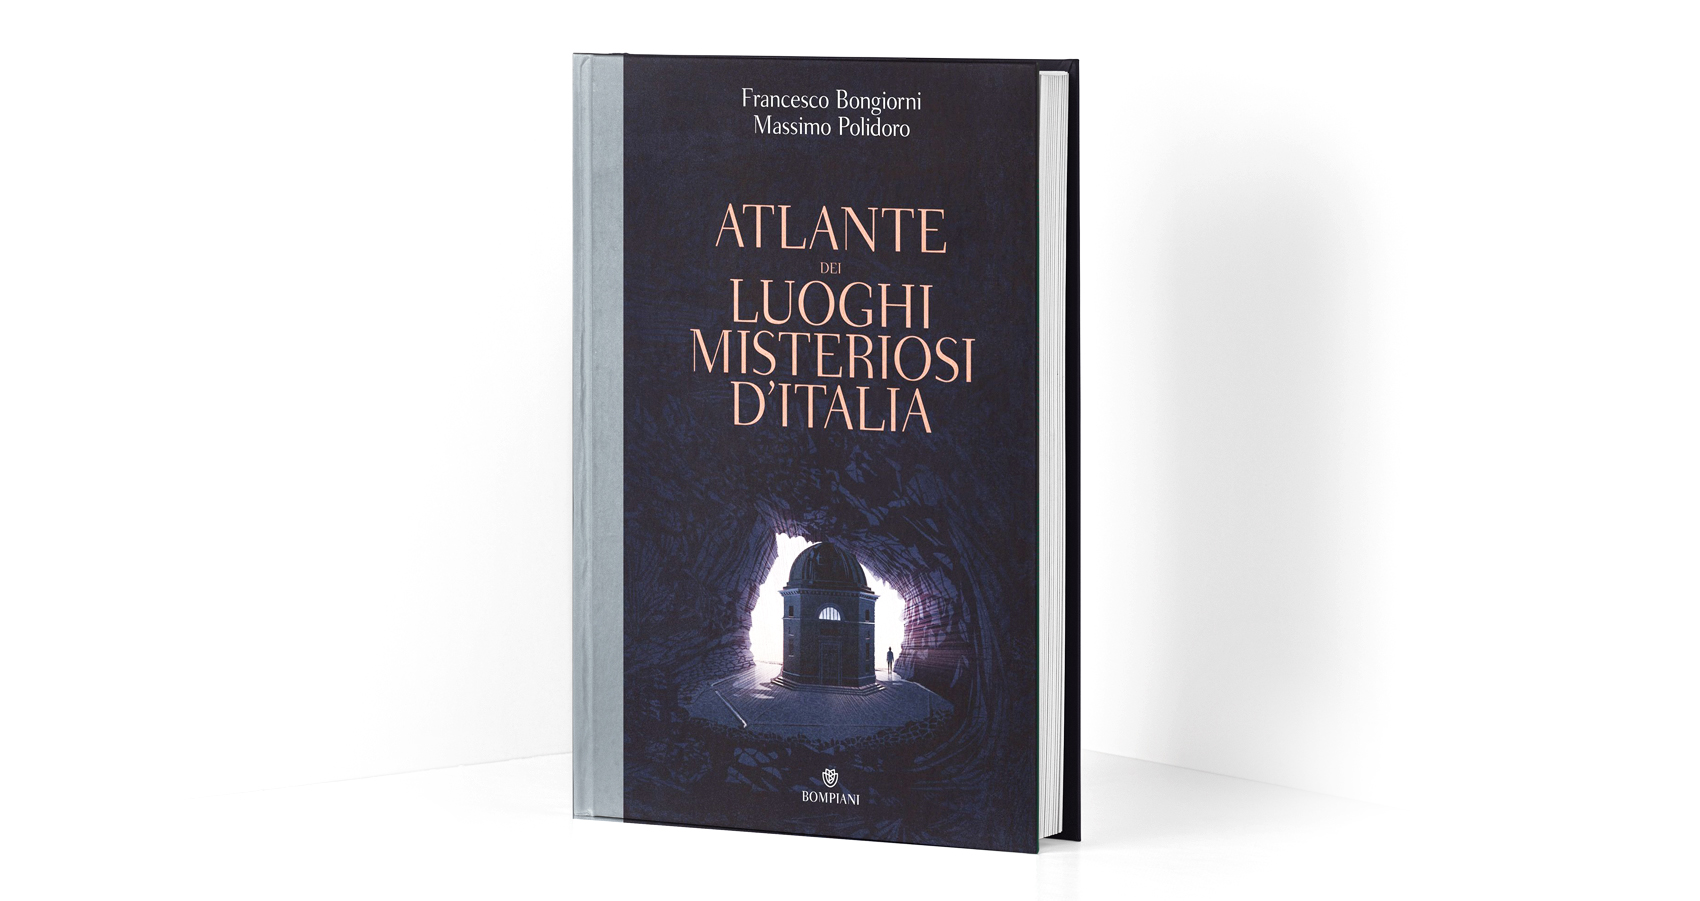 The Atlas of the Mysterious Places of Italy